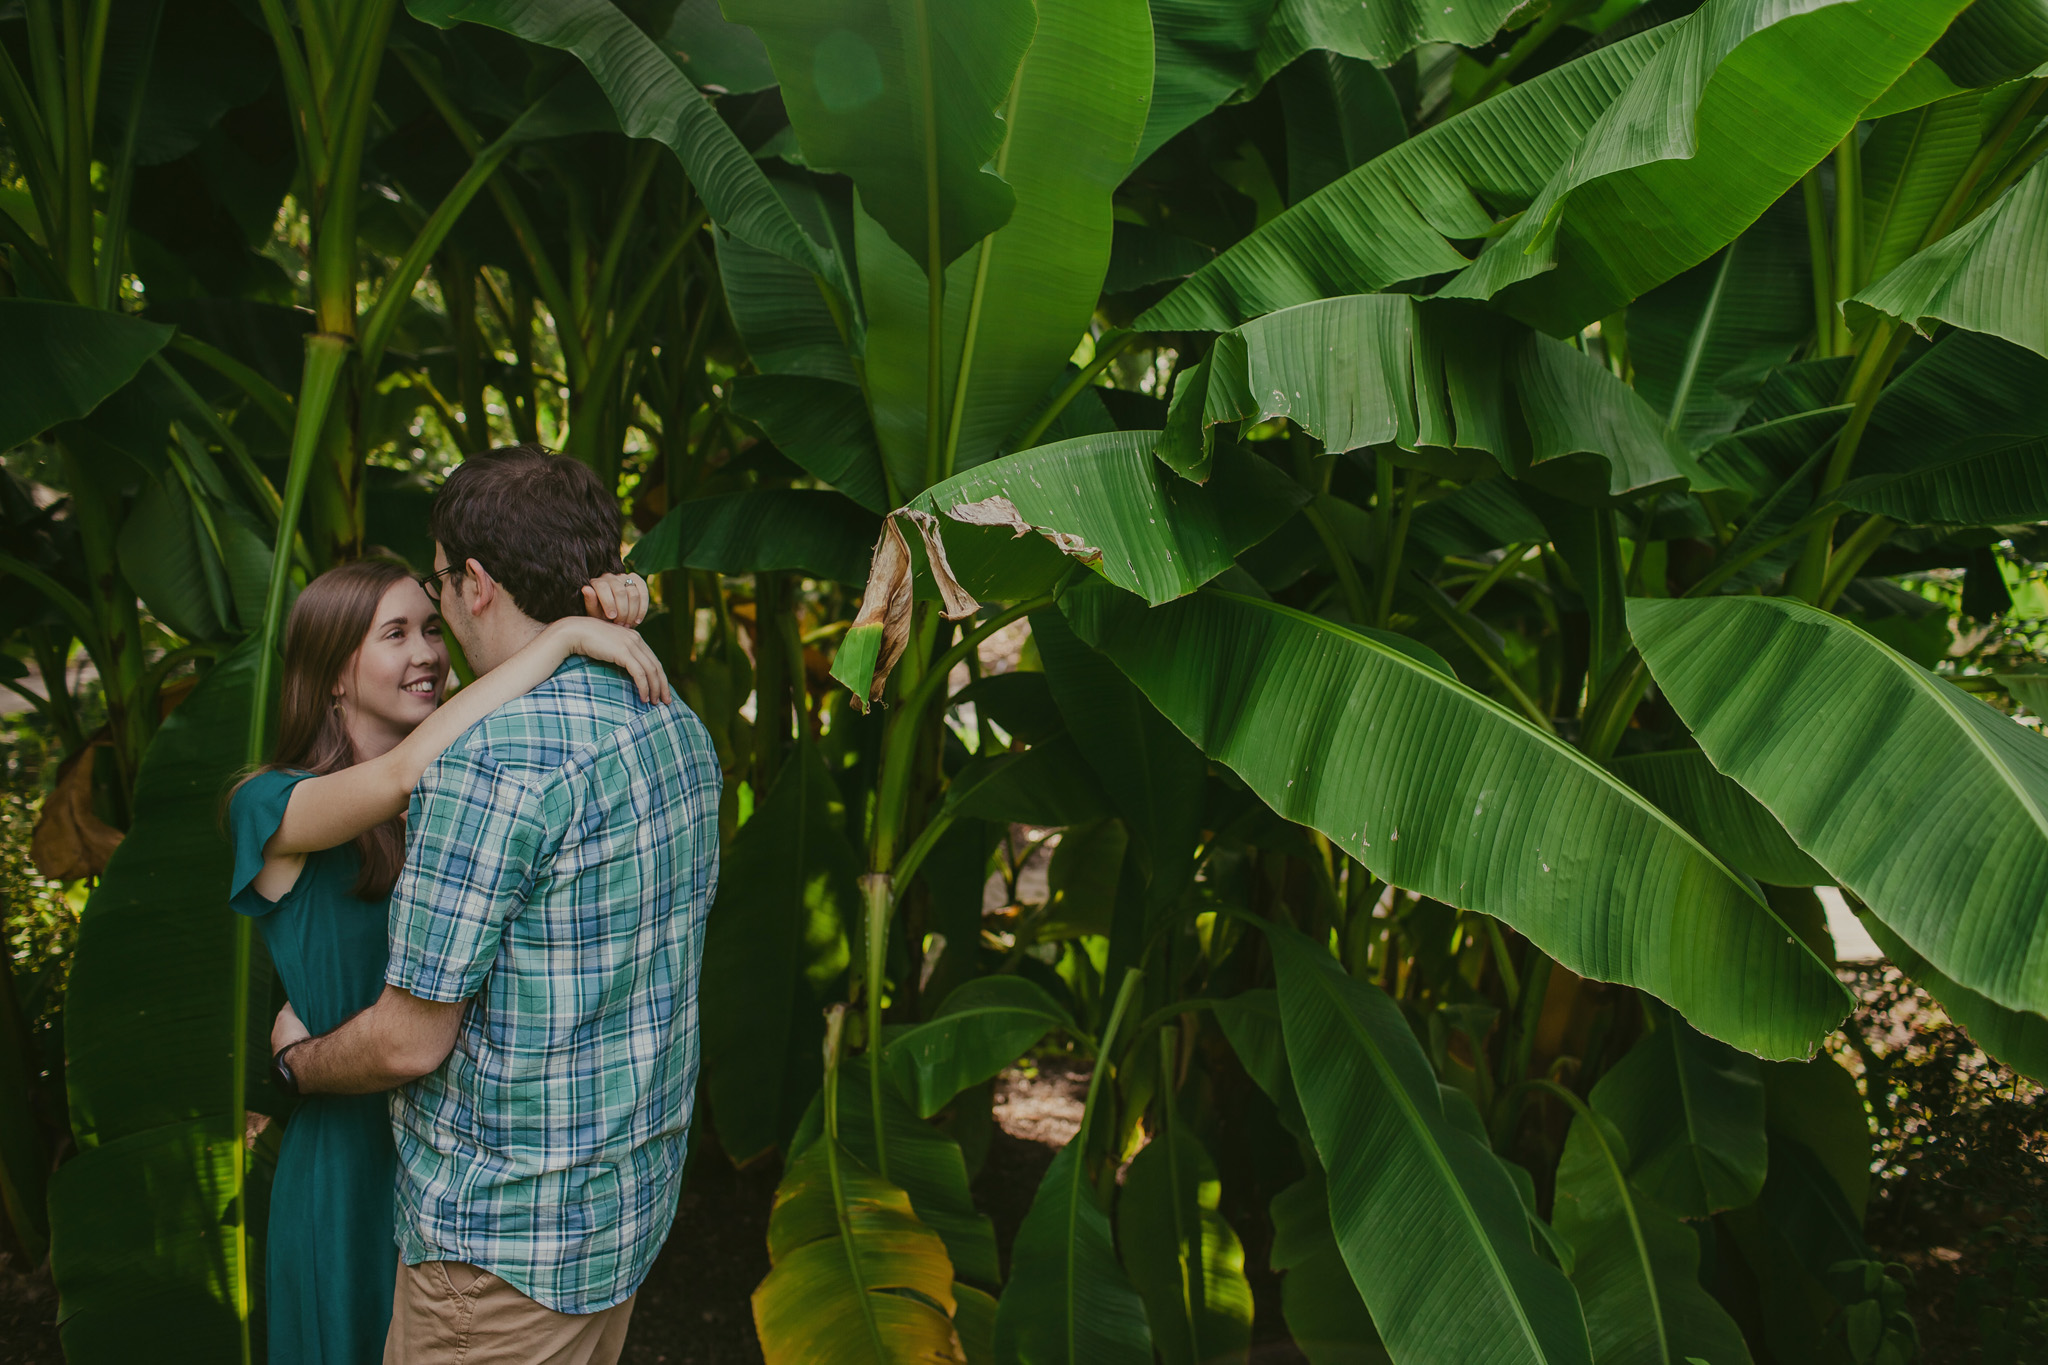 Couple snuggles in the palms at the JC Raulston Arboretum in Raleigh, NC